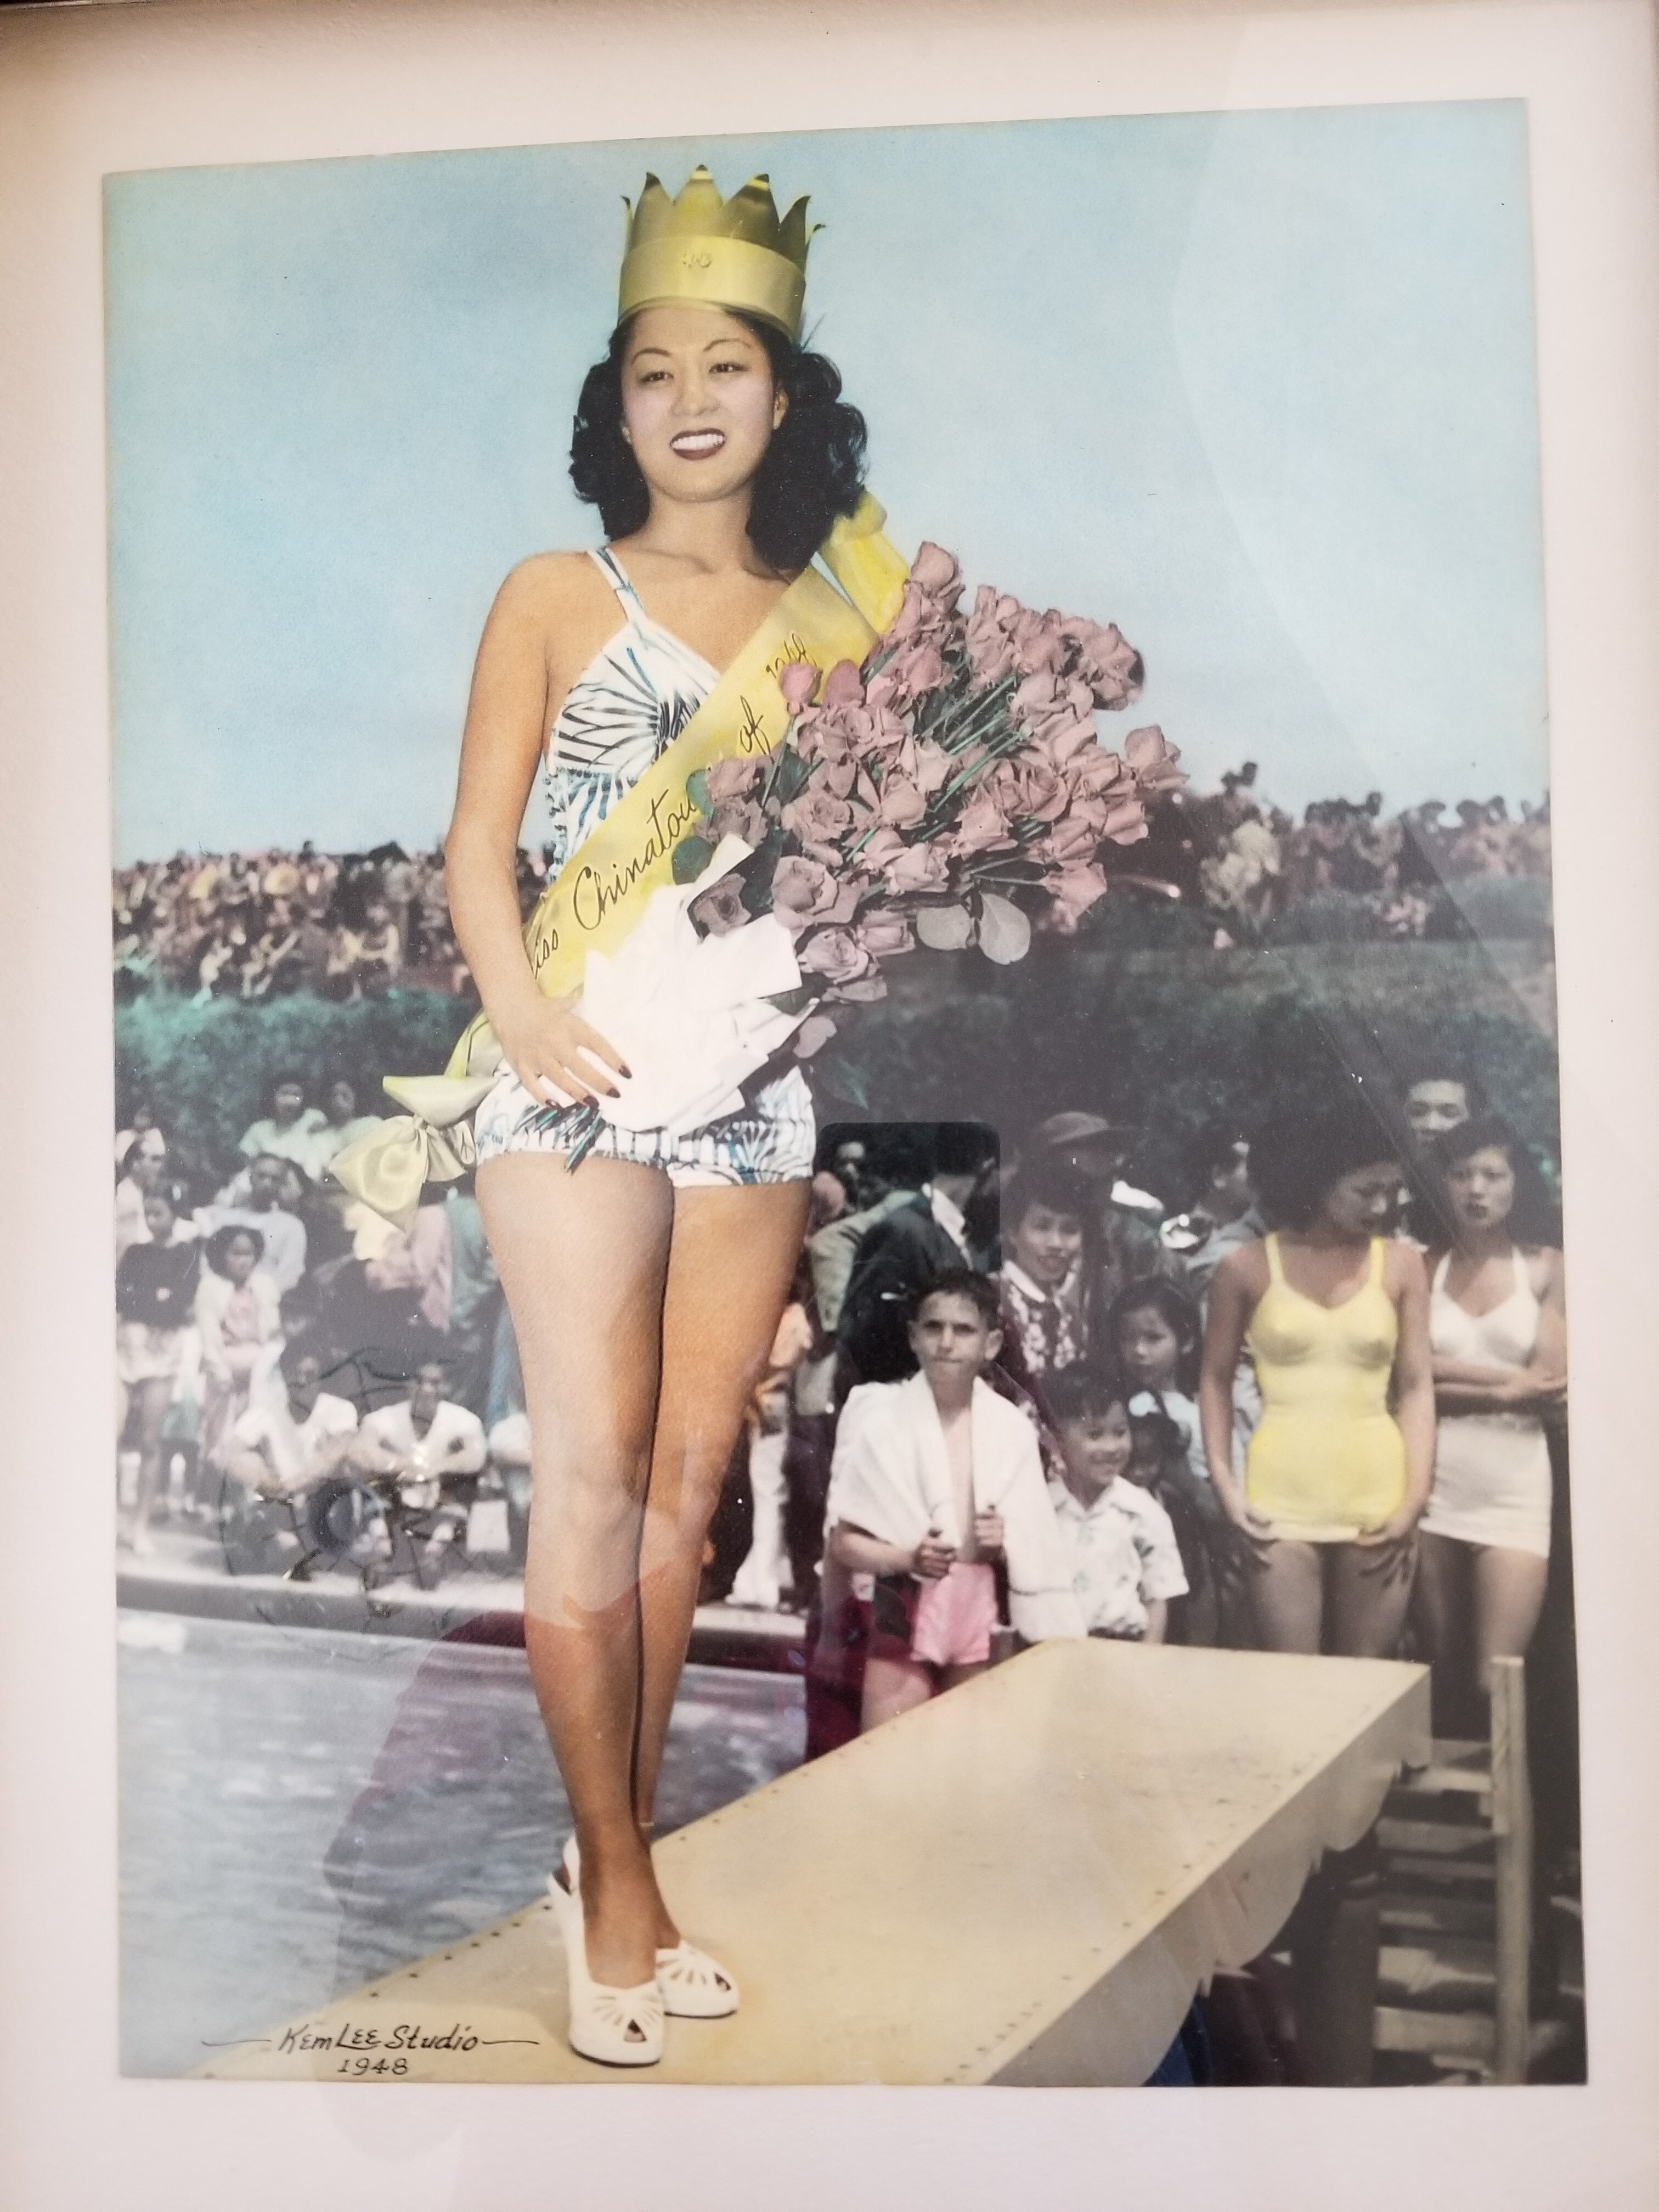 Penny Wong won the first Miss Chinatown beauty contest in San Francisco in 1948.